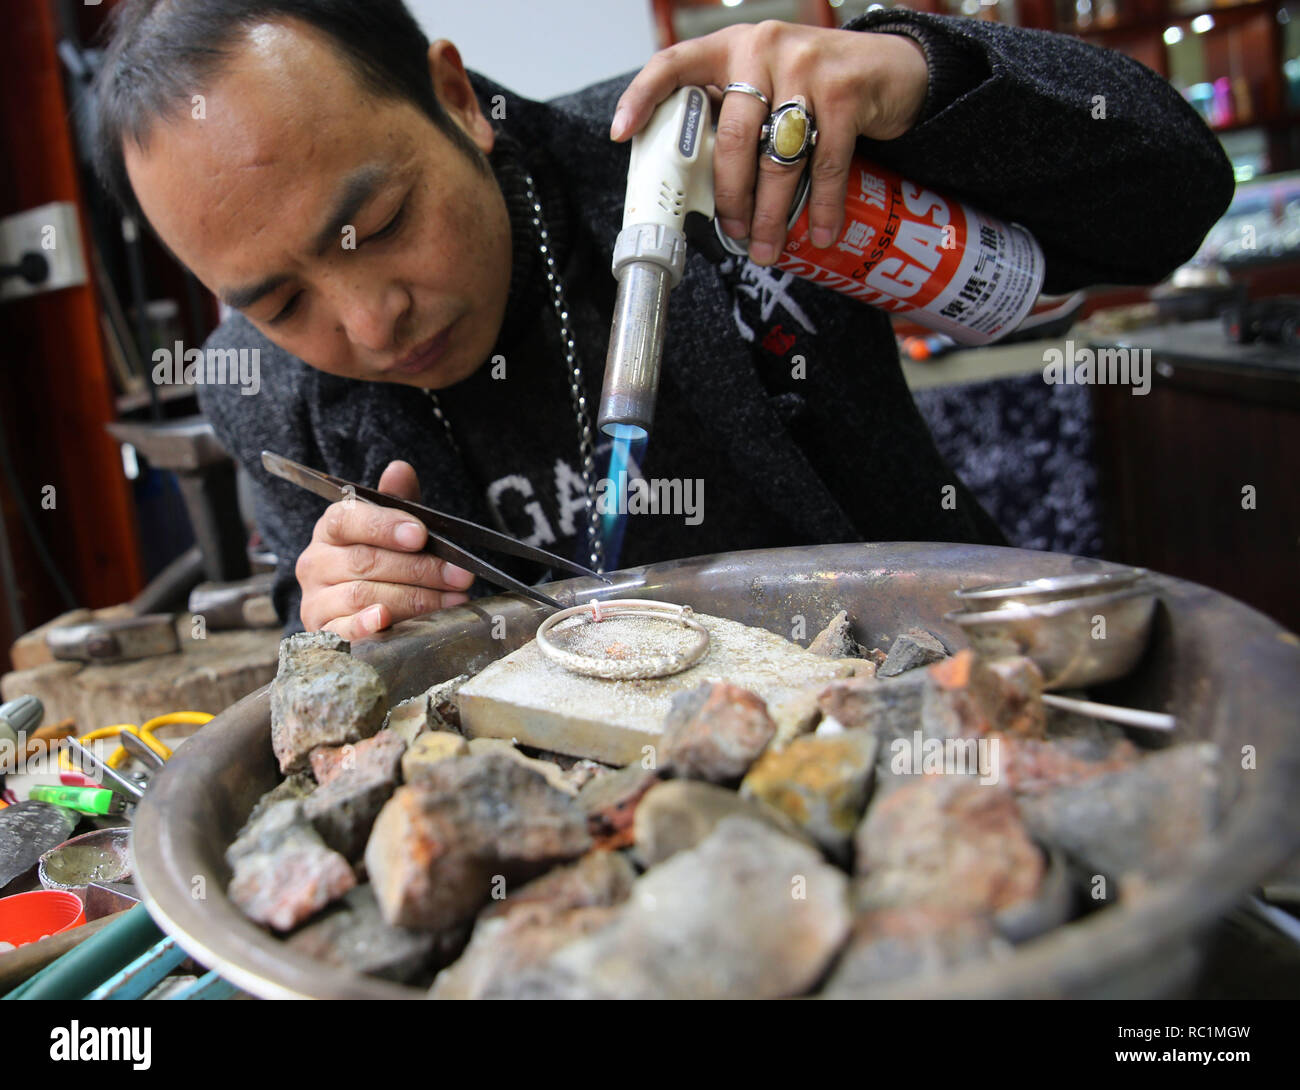 Zhangjiajie, China's Hunan Province. 13th Jan, 2019. Craftsman Tian Yinzhong makes silverware at a workshop in Wulingyuan District of Zhangjiajie, central China's Hunan Province, Jan. 13, 2019. As the Spring Festival is approaching, more traditional silverwares are in demand. The local workshops have been expanding production and promoting sales through live streaming and online platforms. Credit: Wu Yongbing/Xinhua/Alamy Live News Stock Photo